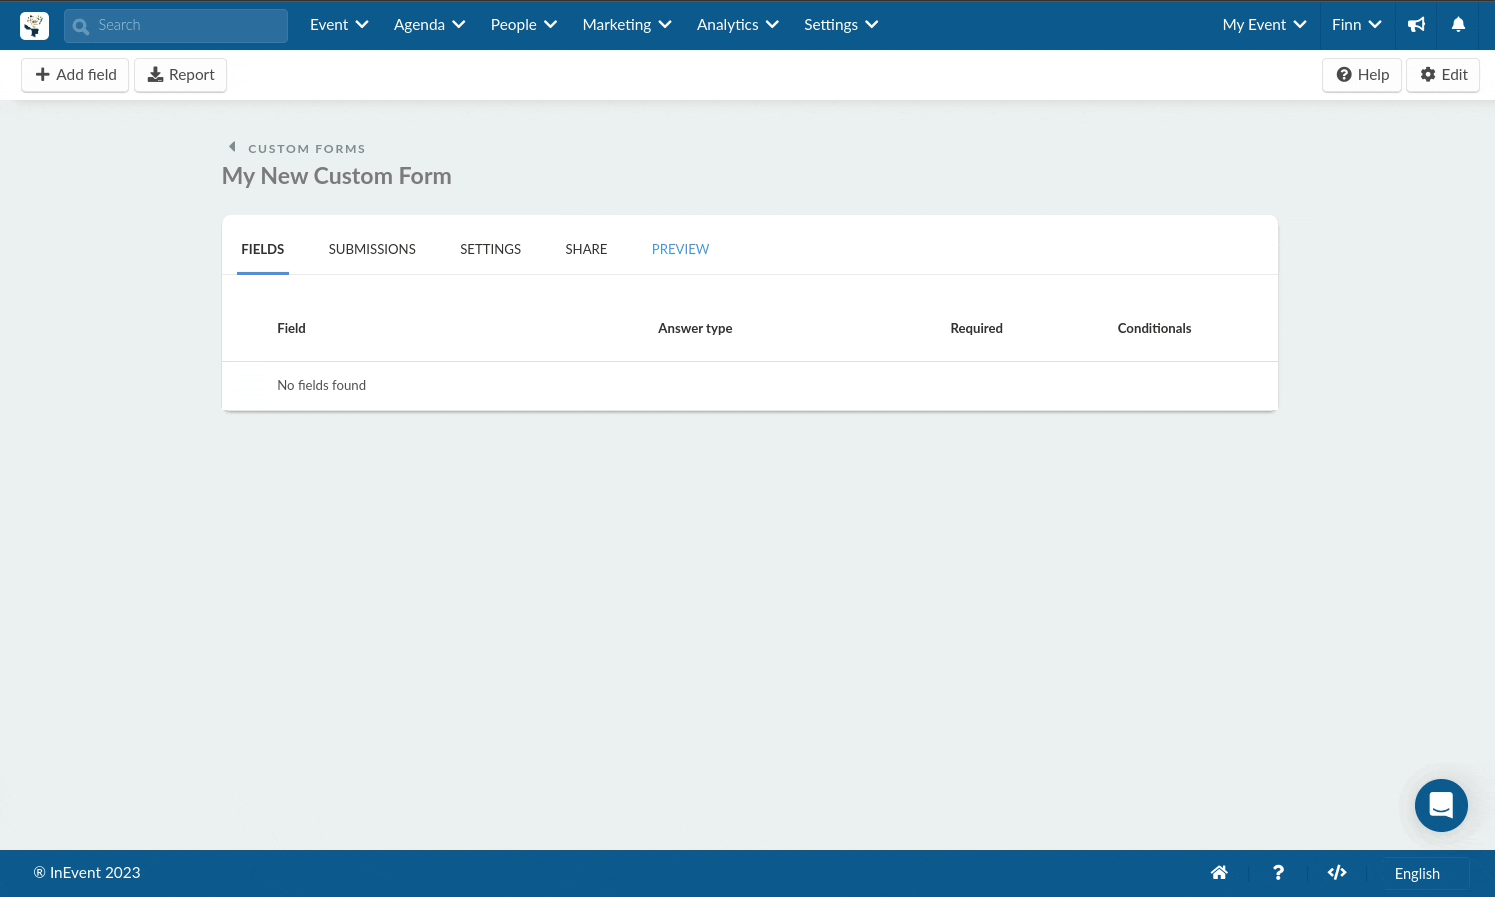 GIF showing how to add a field to the custom form